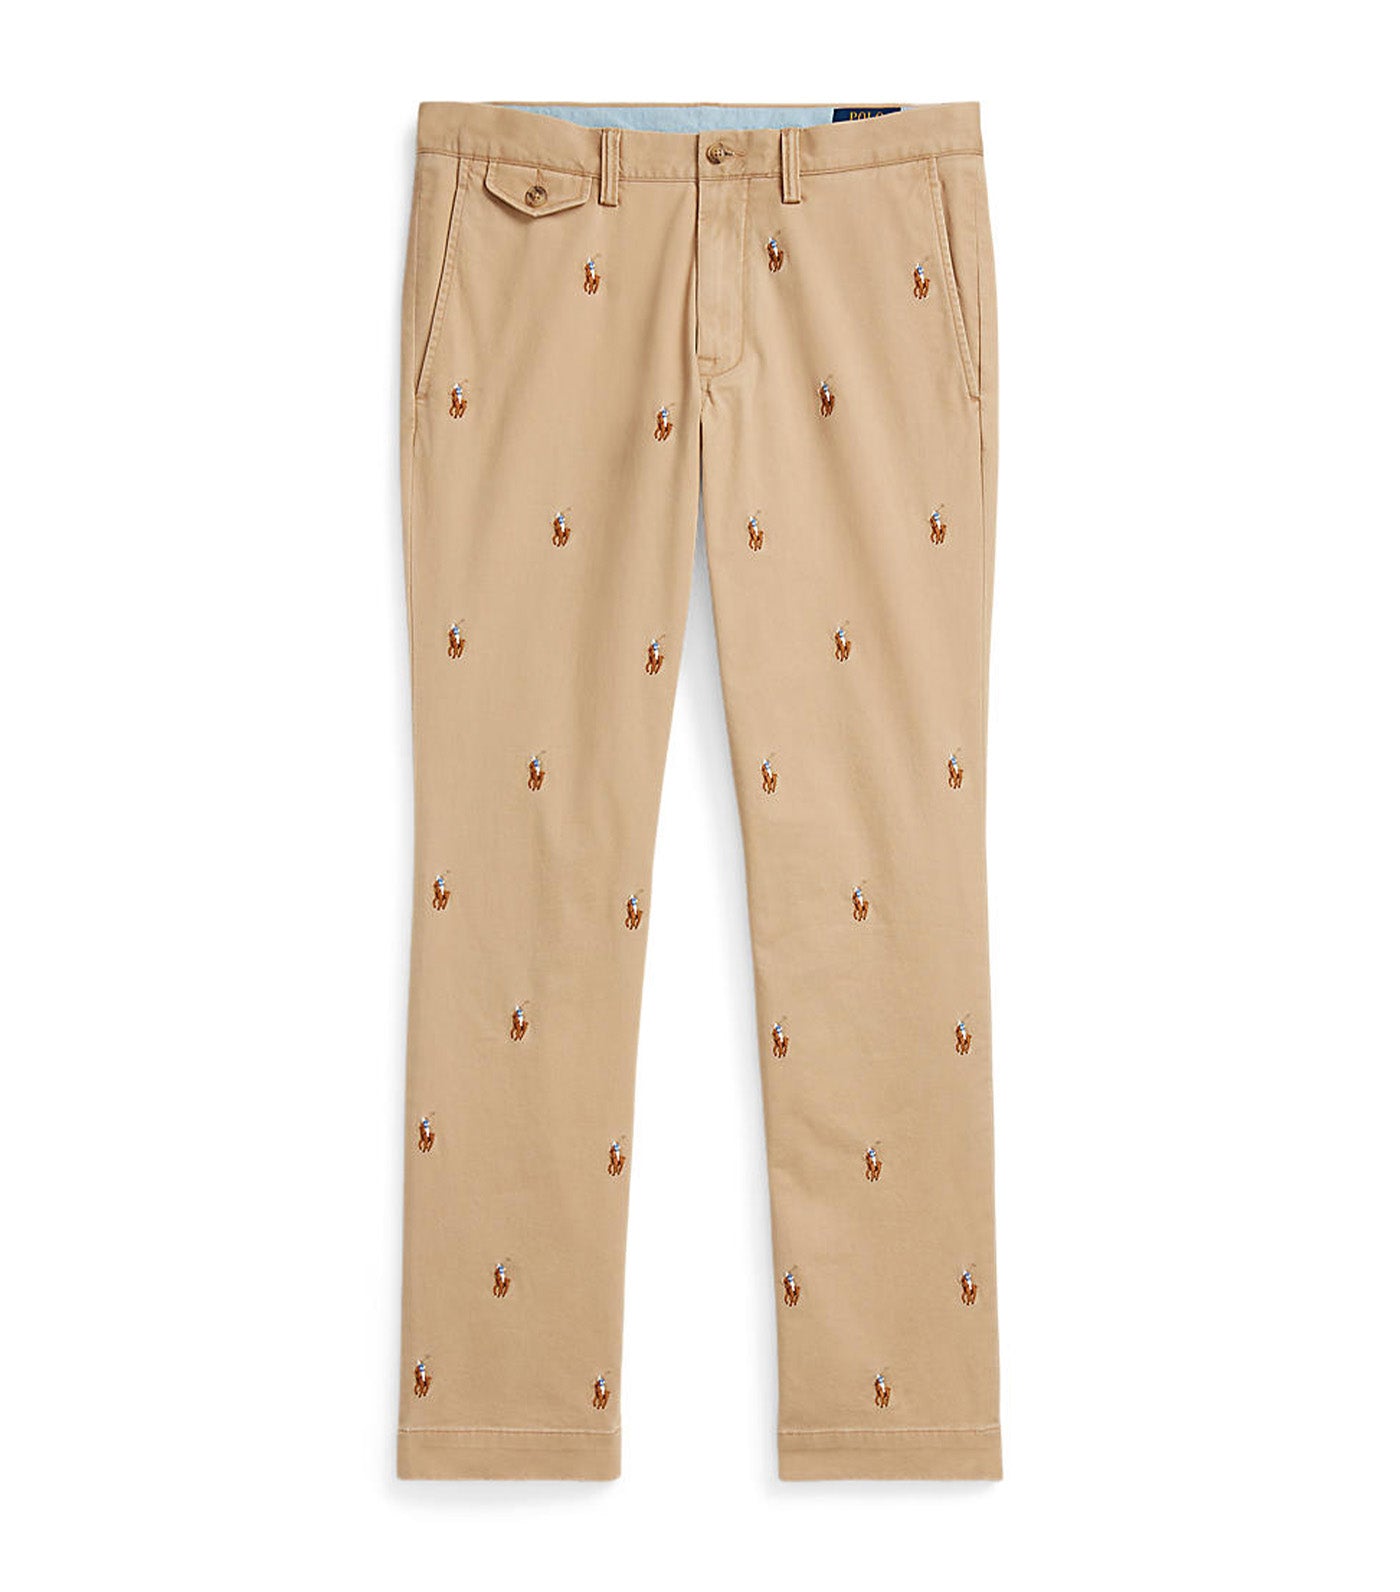 Polo Ralph Lauren Slim Fit Stretch Chinos Classic Khaki at